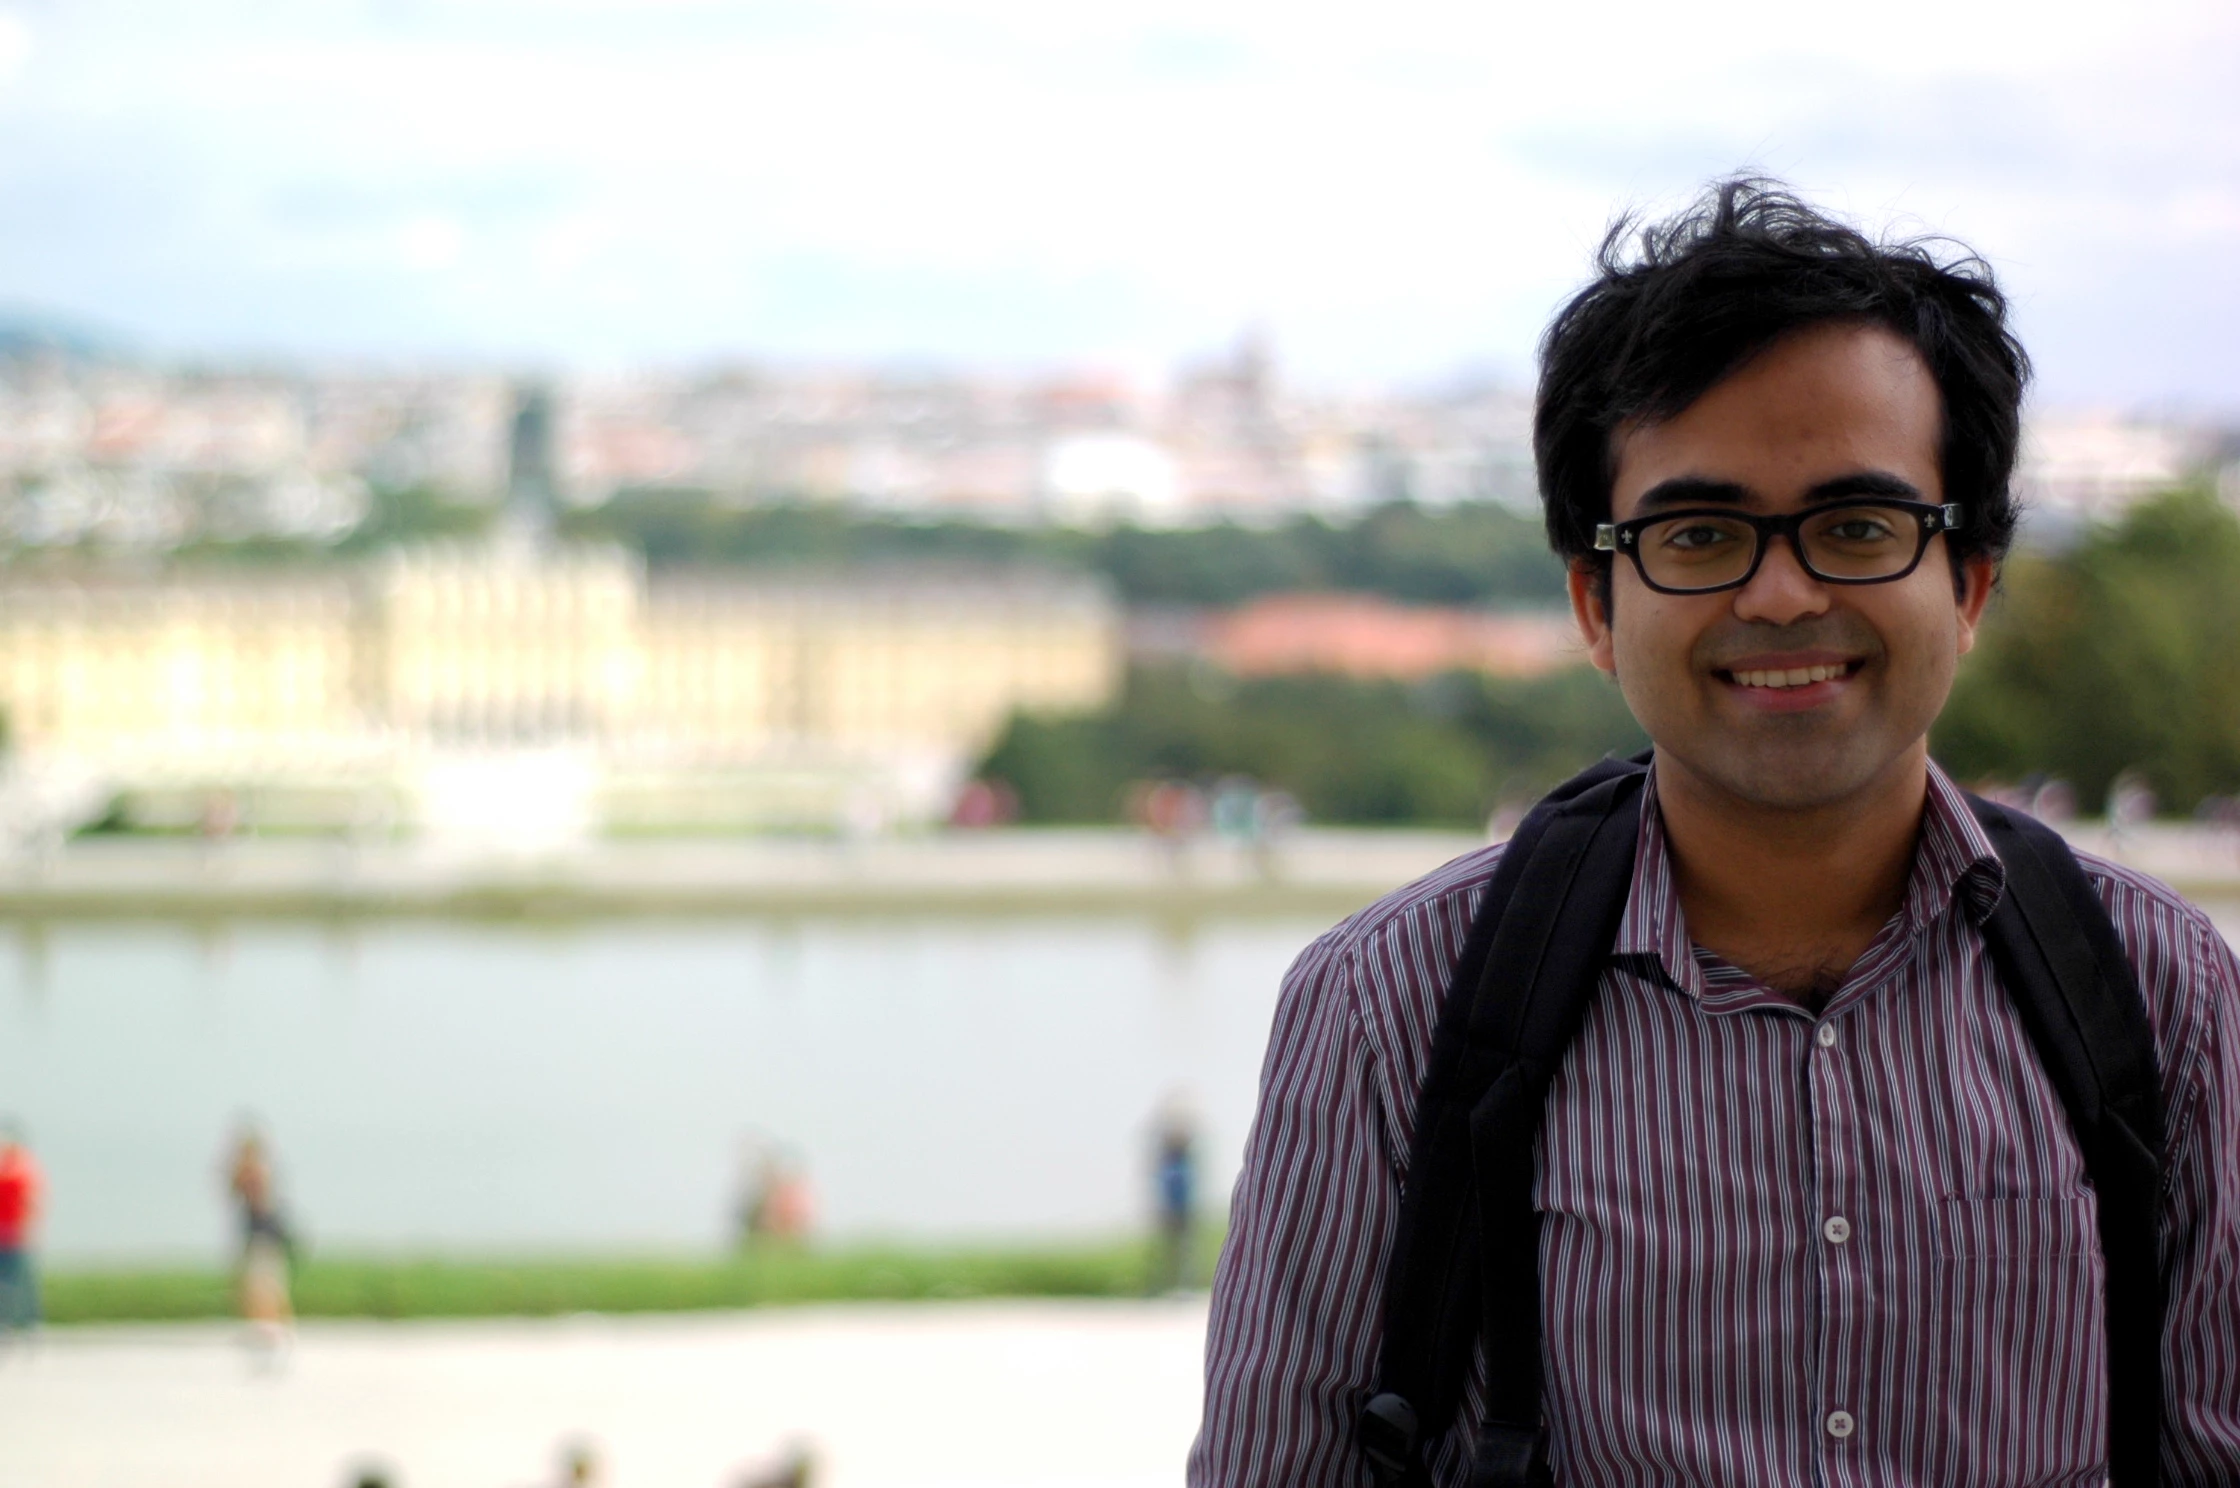 Sayan, founder and CTO of Desygner a graphic design app